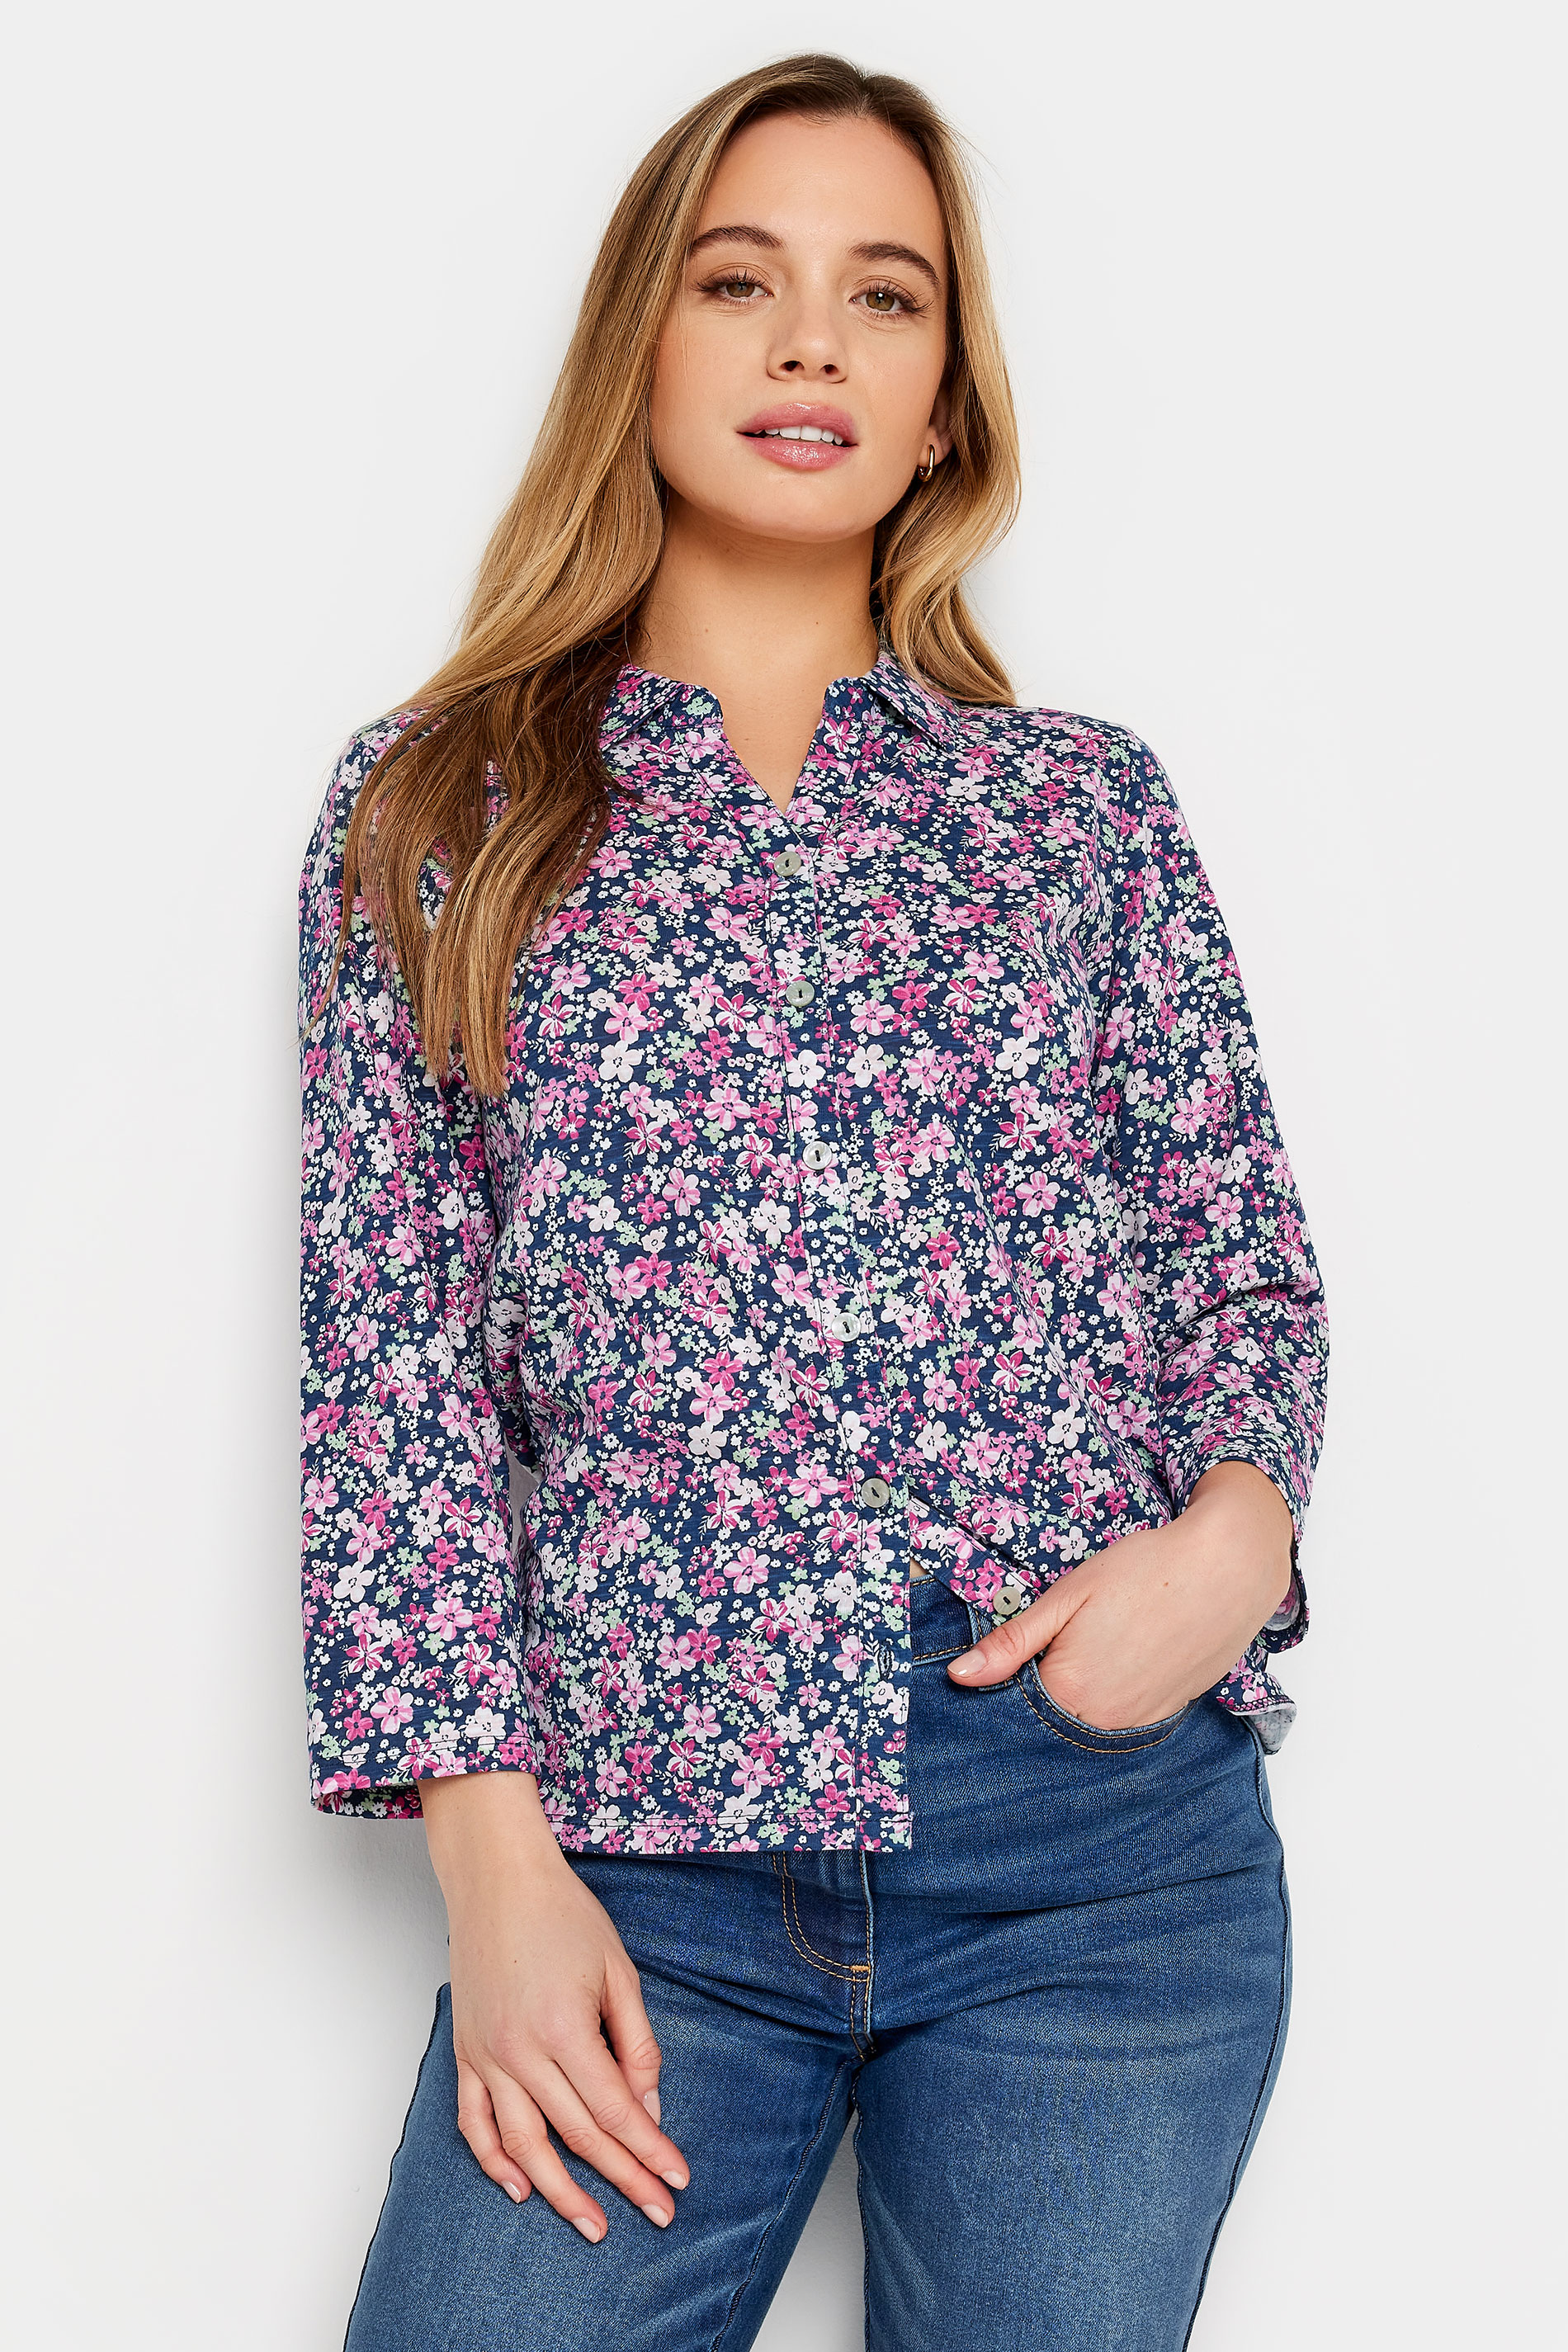 M&Co Petite Pink Floral Print Cotton Collared Shirt | M&Co 1